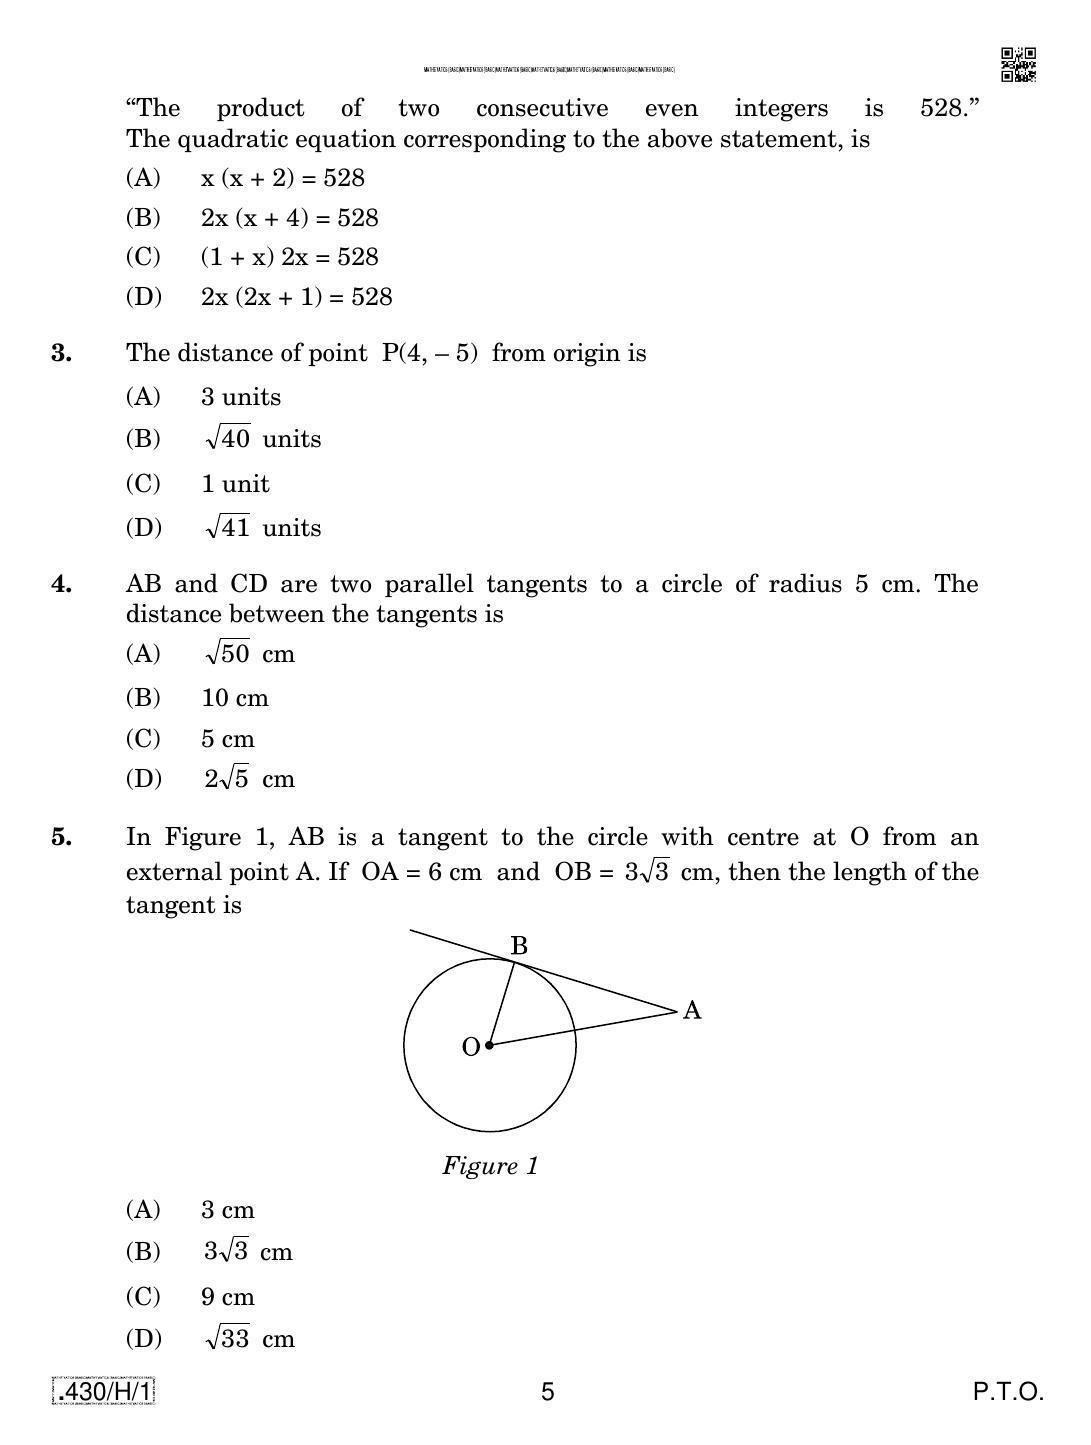 CBSE Class 10 430-C-1 - Maths (Basic) 2020 Compartment Question Paper - Page 5